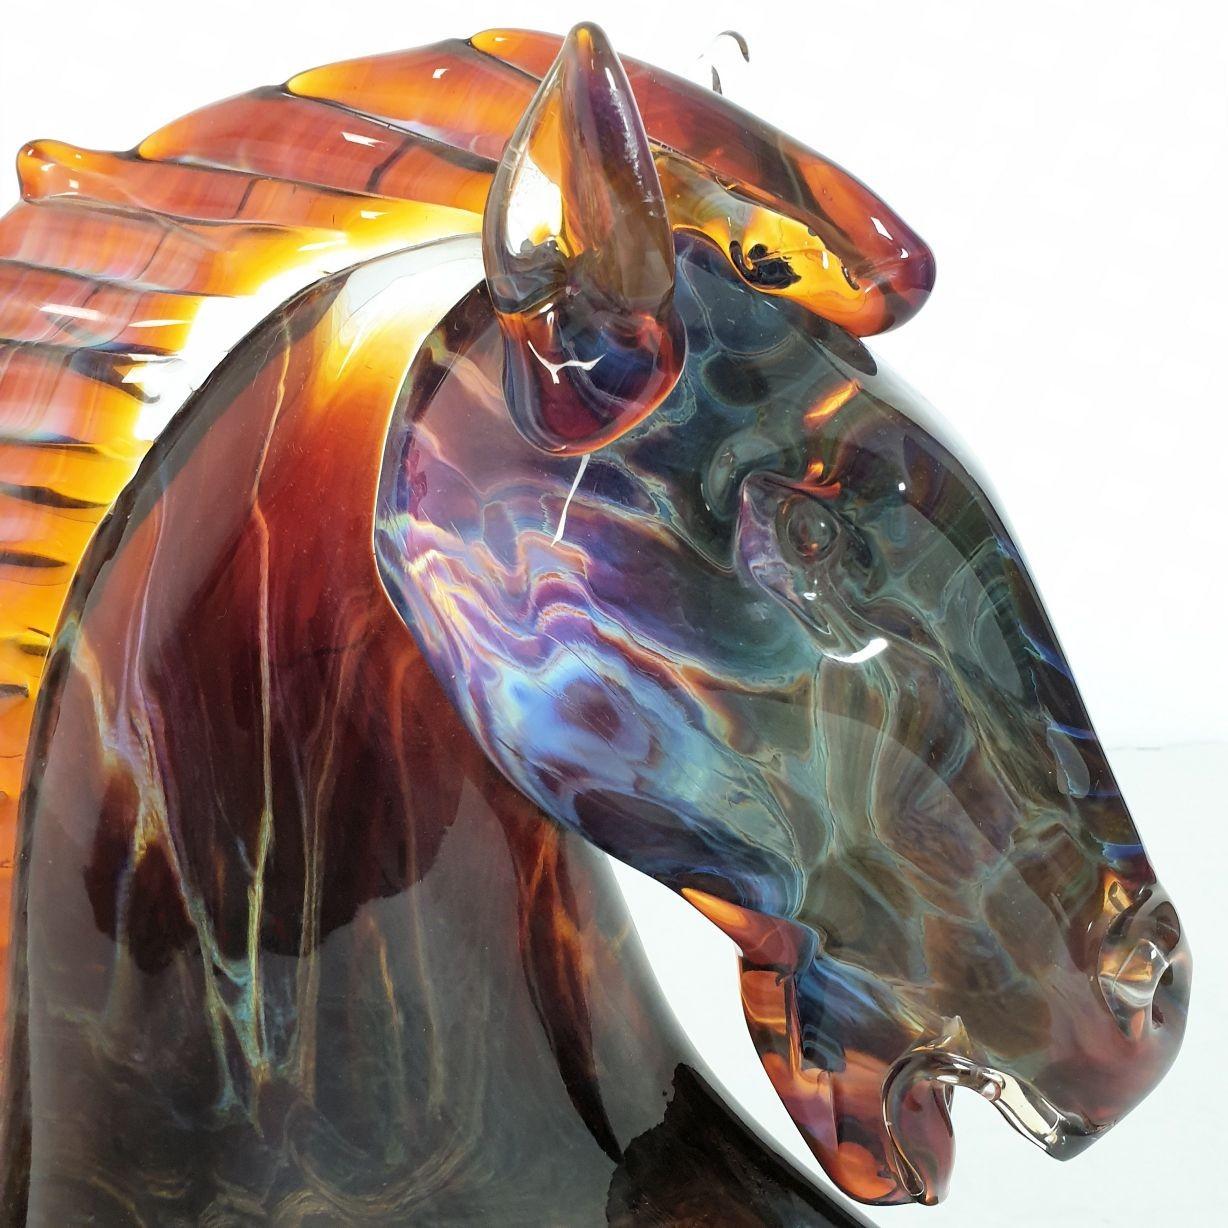 Large Chalcedony Murano glass horse sculpture, signed by artist: Fabio Tagliapietra.
Italy circa 1990.
The Murano glass technique is Chalcedony: different metals are added to the glass during fusion, to obtain the effects of precious stones like